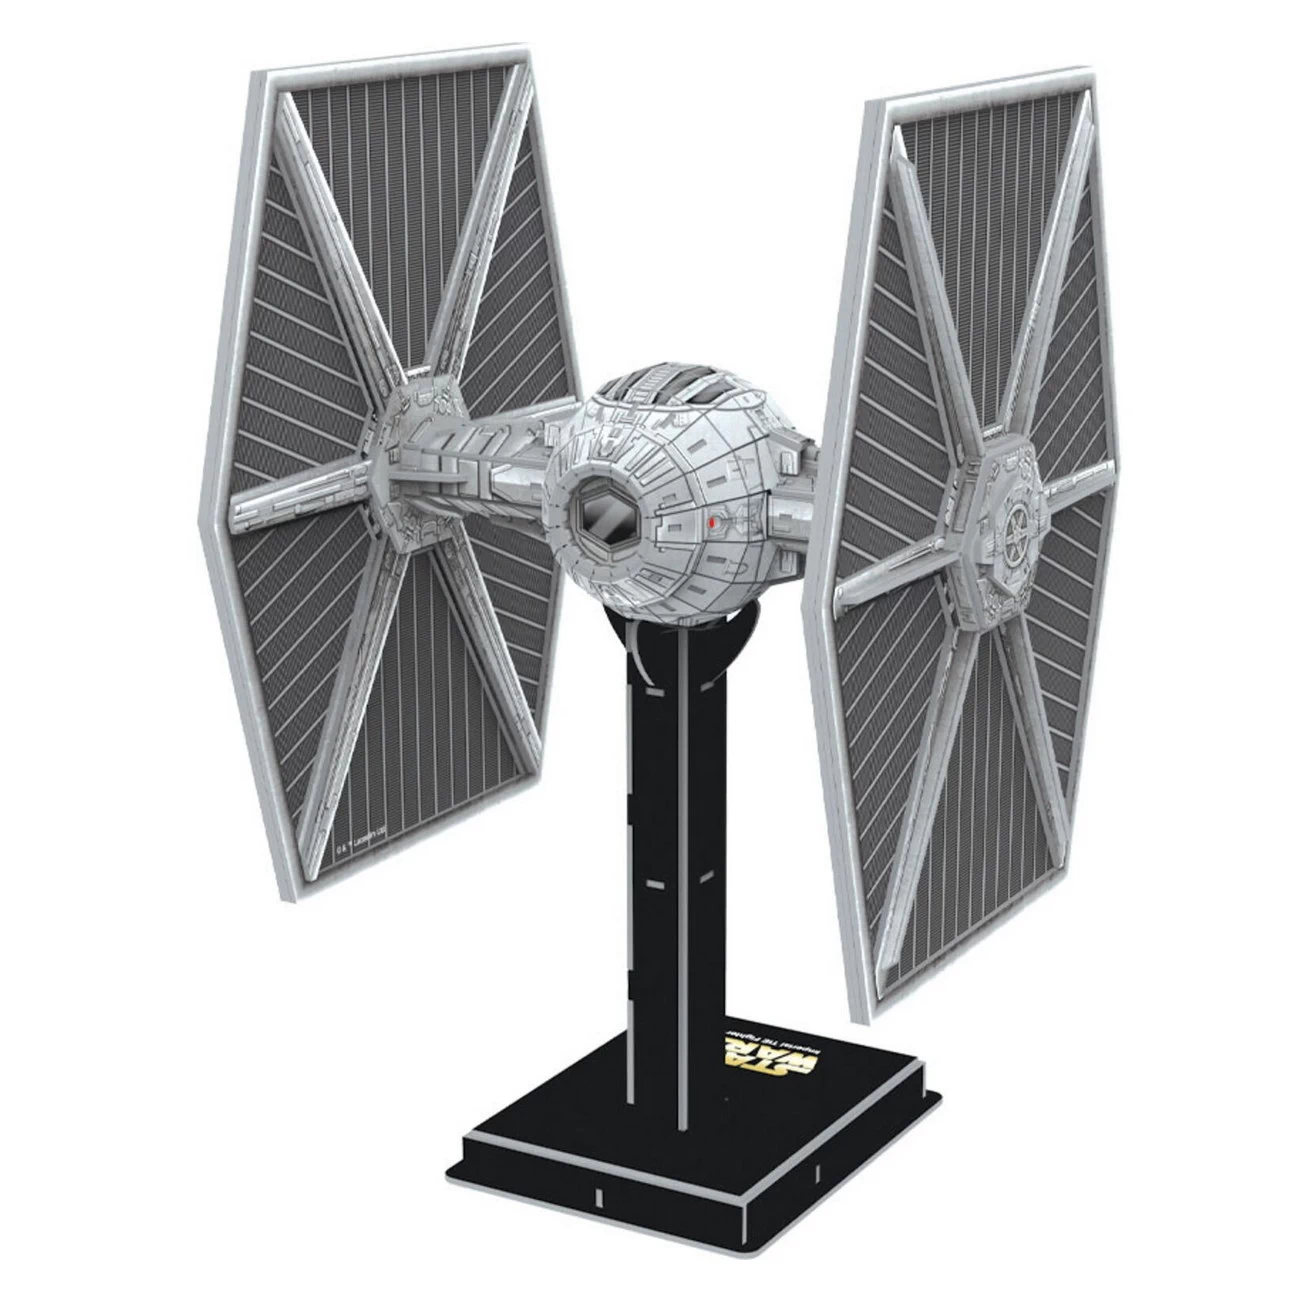 Revell 00317 - Star Wars Imperial TIE Fighter - 3D Puzzle